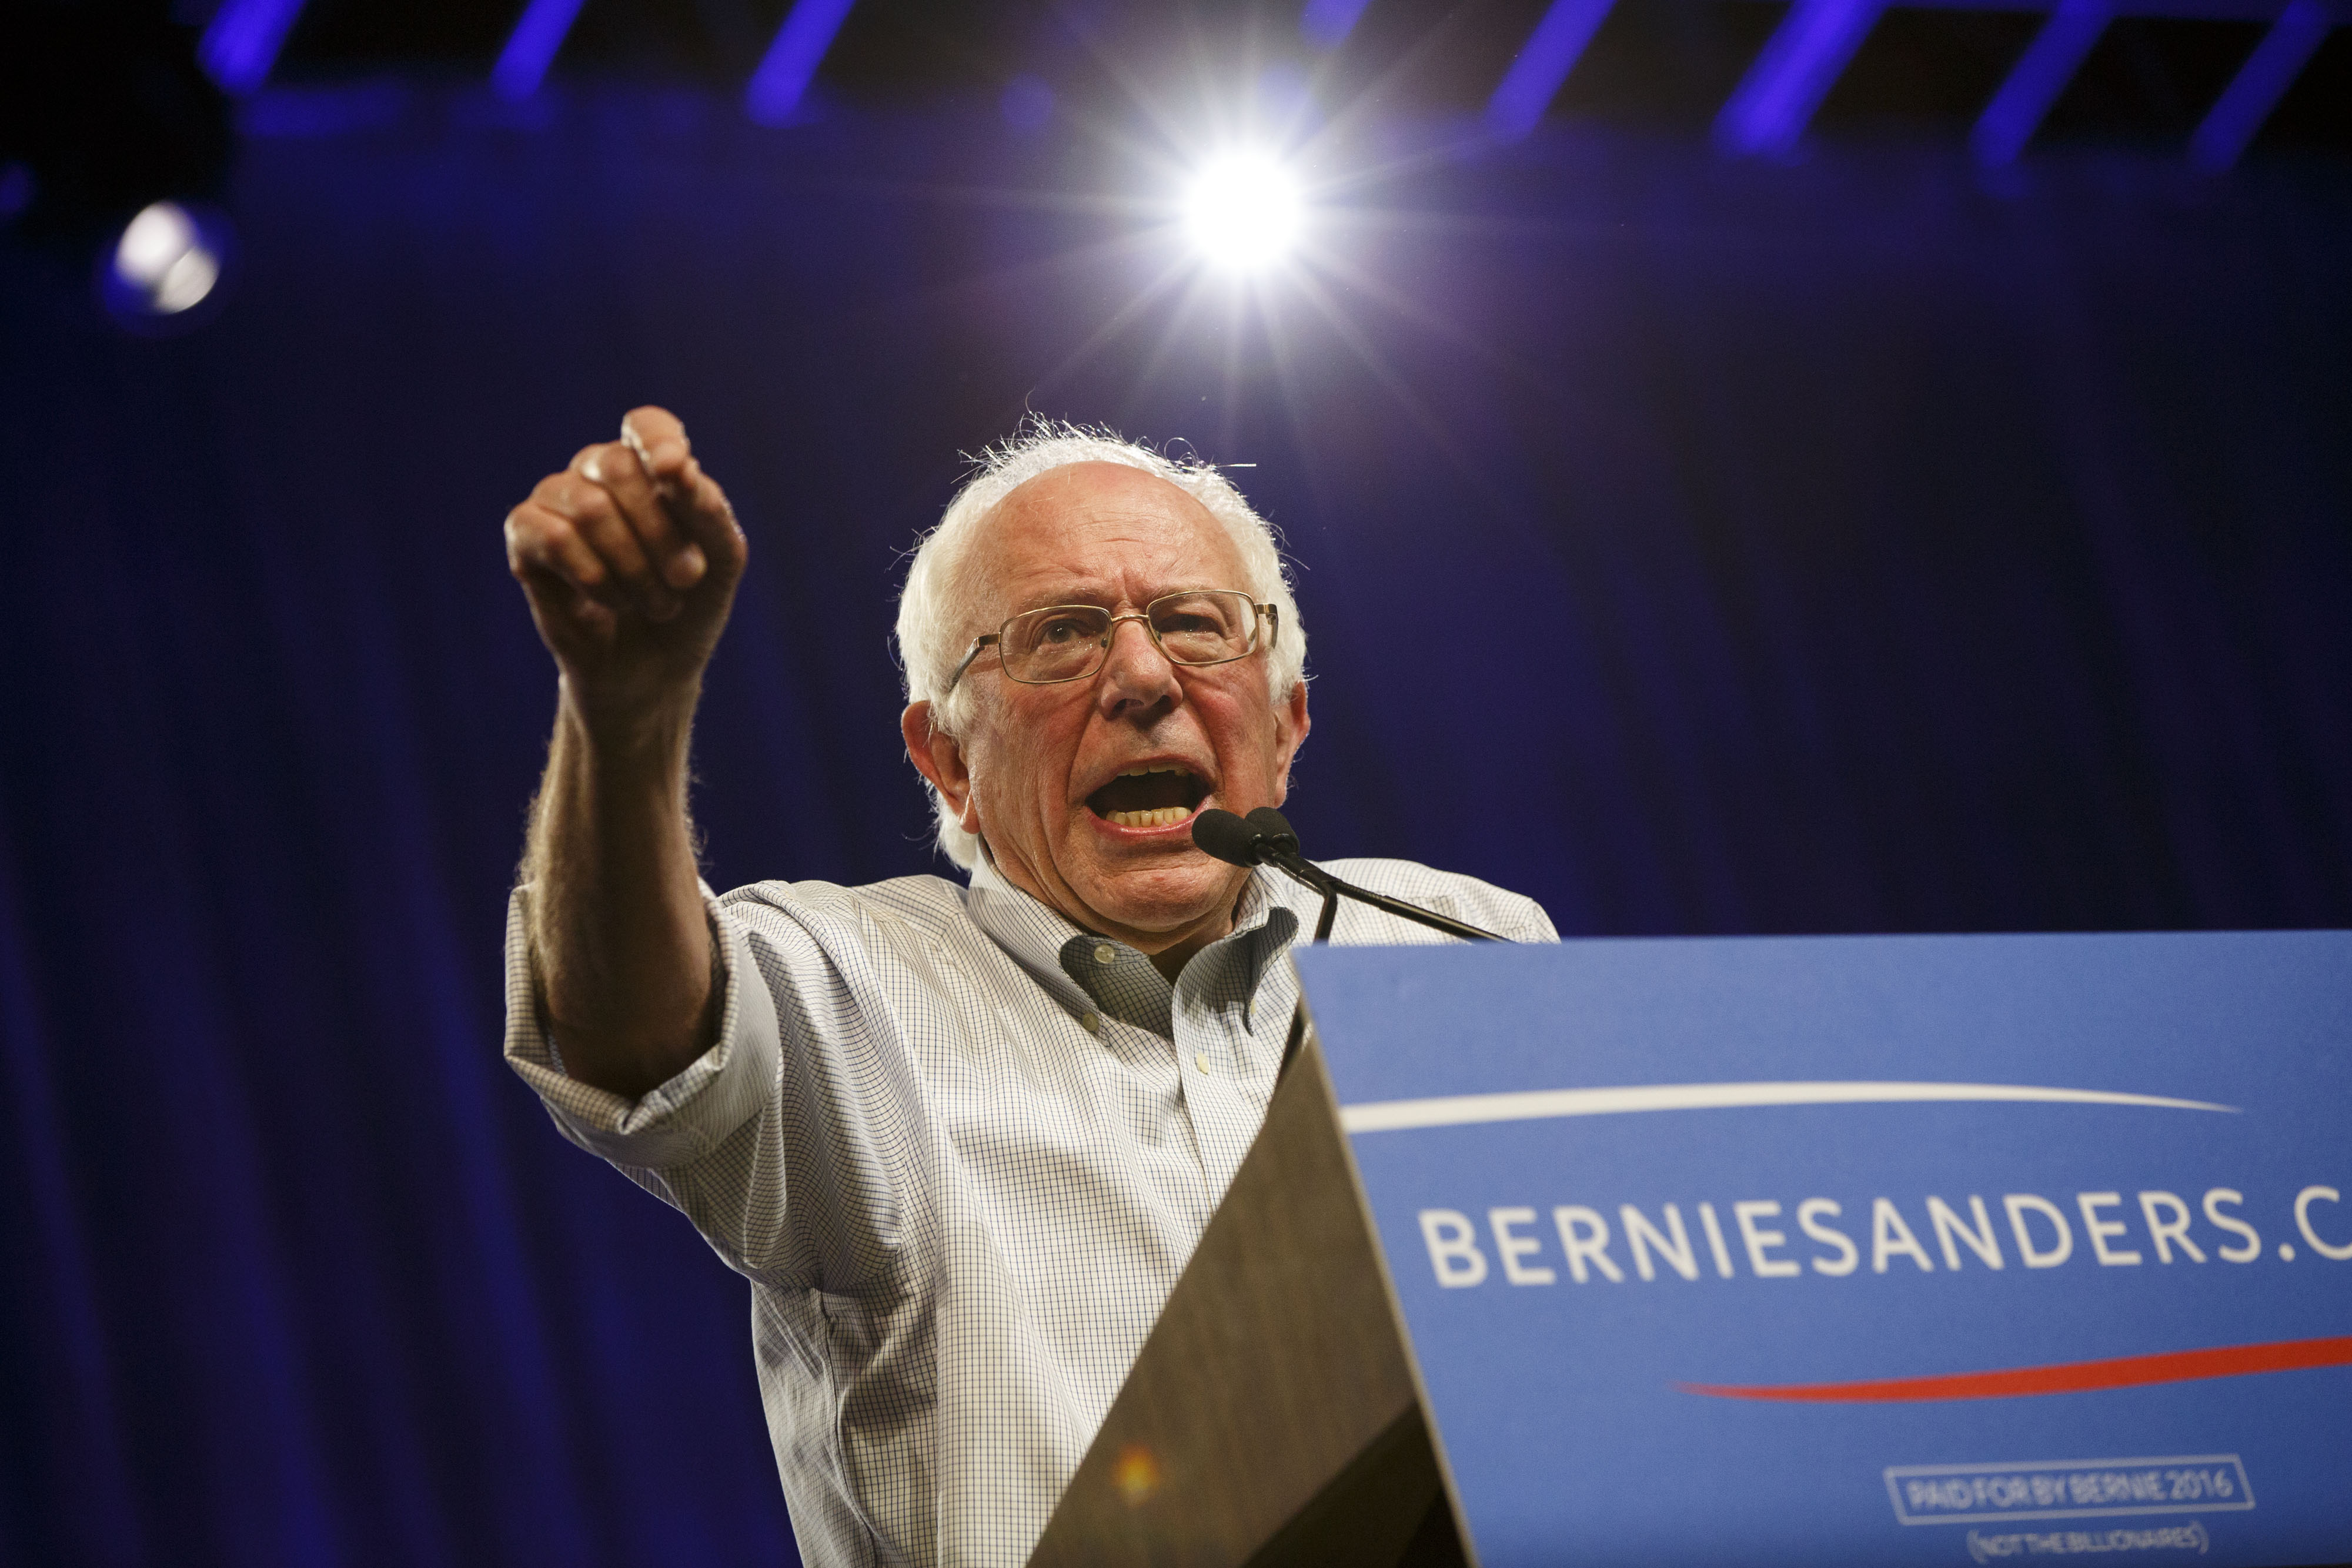 U.S. Senator Bernie Sanders gestures as he speaks during a campaign event at the LA Memorial Sports Arena in Los Angeles on Aug. 10, 2015. (Bloomberg via Getty Images)